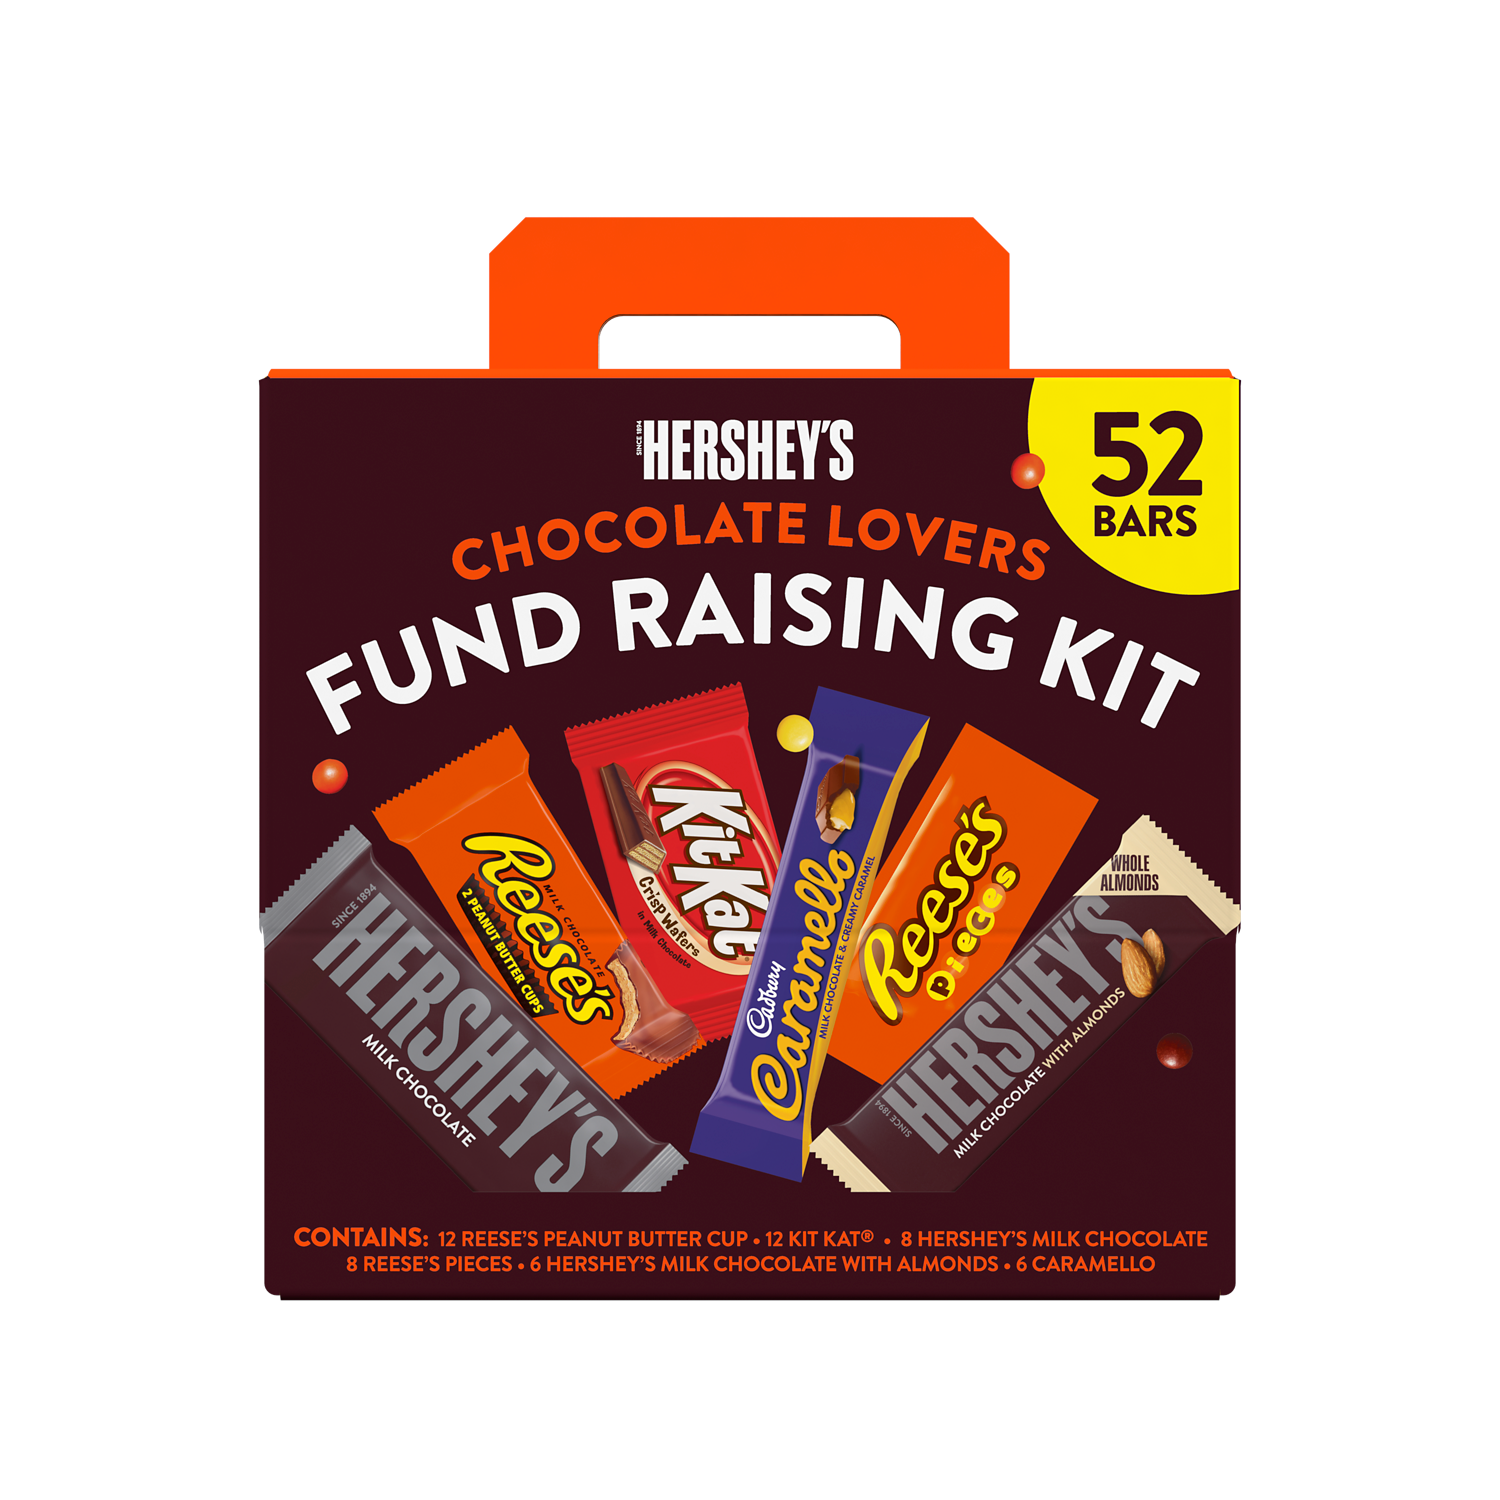 Hershey Chocolate Lovers Fund Raising Kit, 79.52 oz box, 52 bars - Front of Package